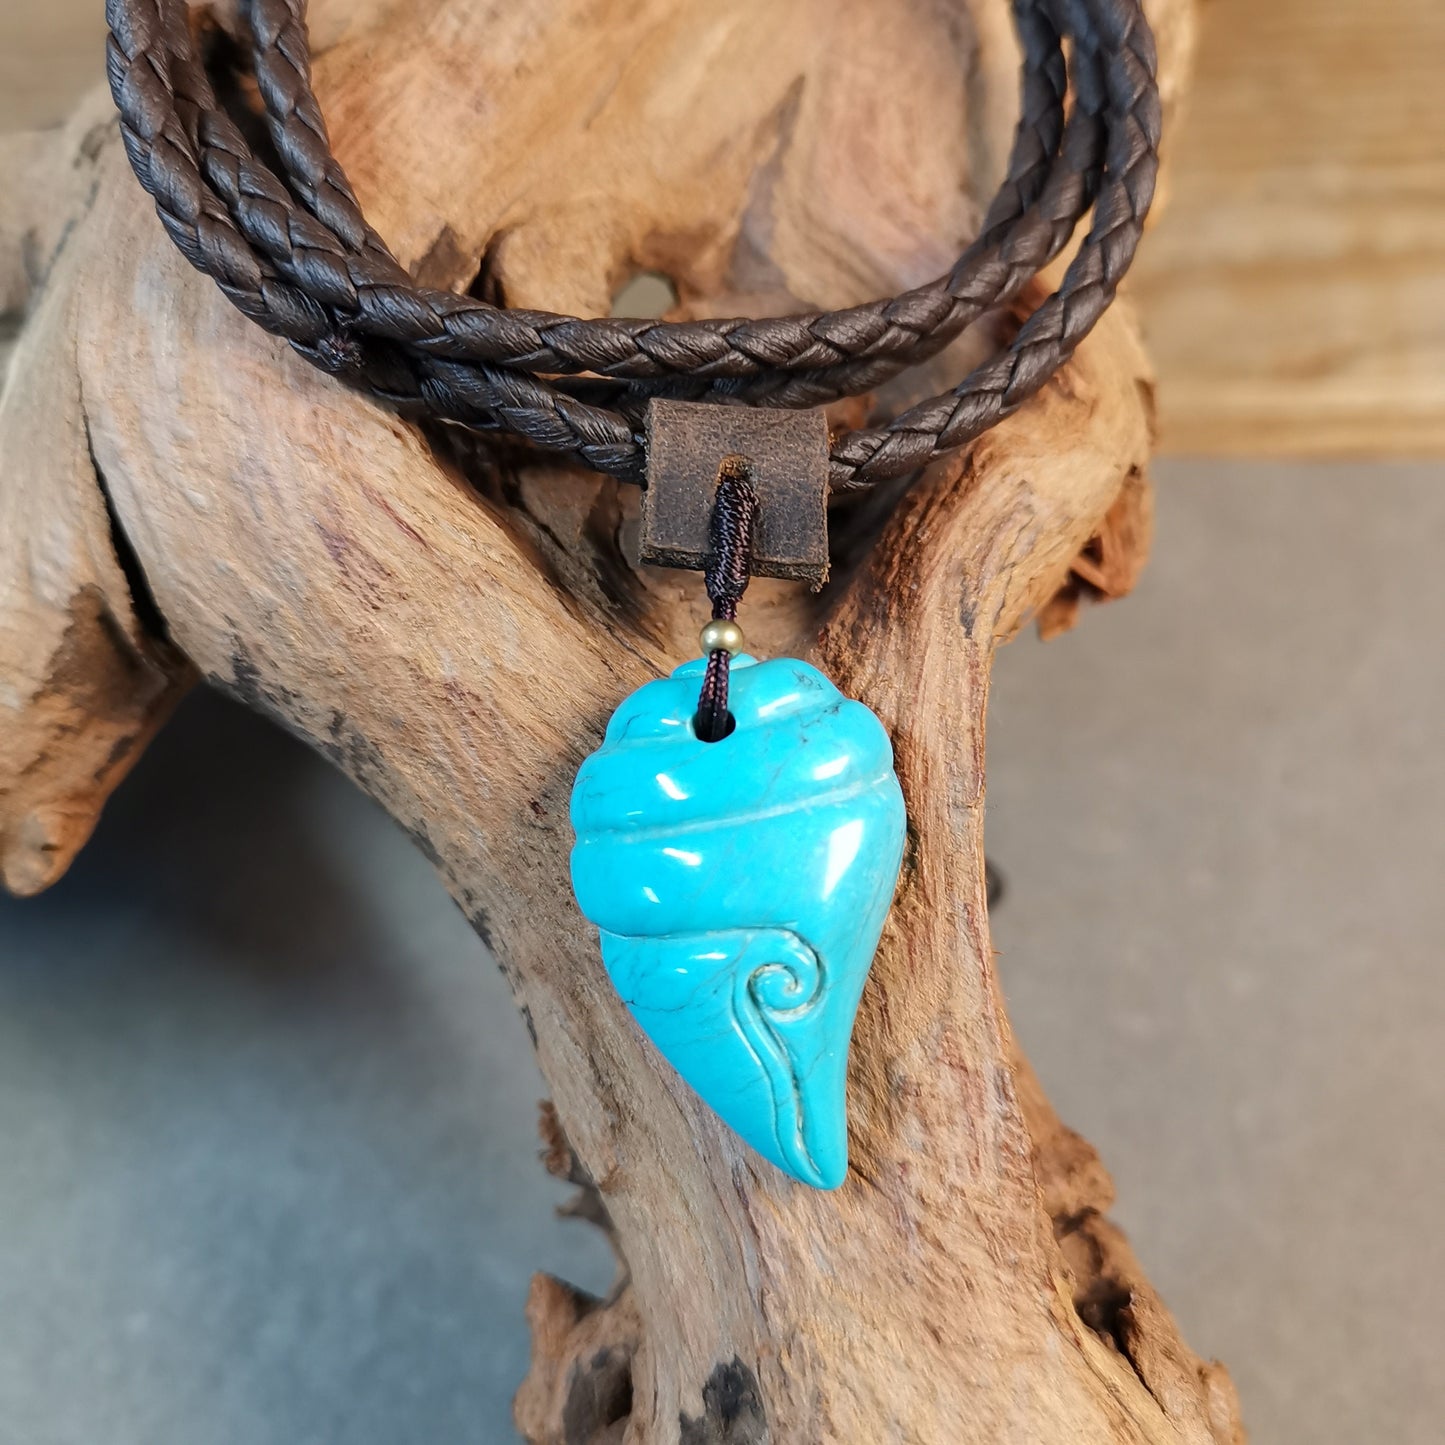 Gandhanra Handmade Tibetan Shankha Amulet,Turquoise Carved Conch Pendant with Leather Cord